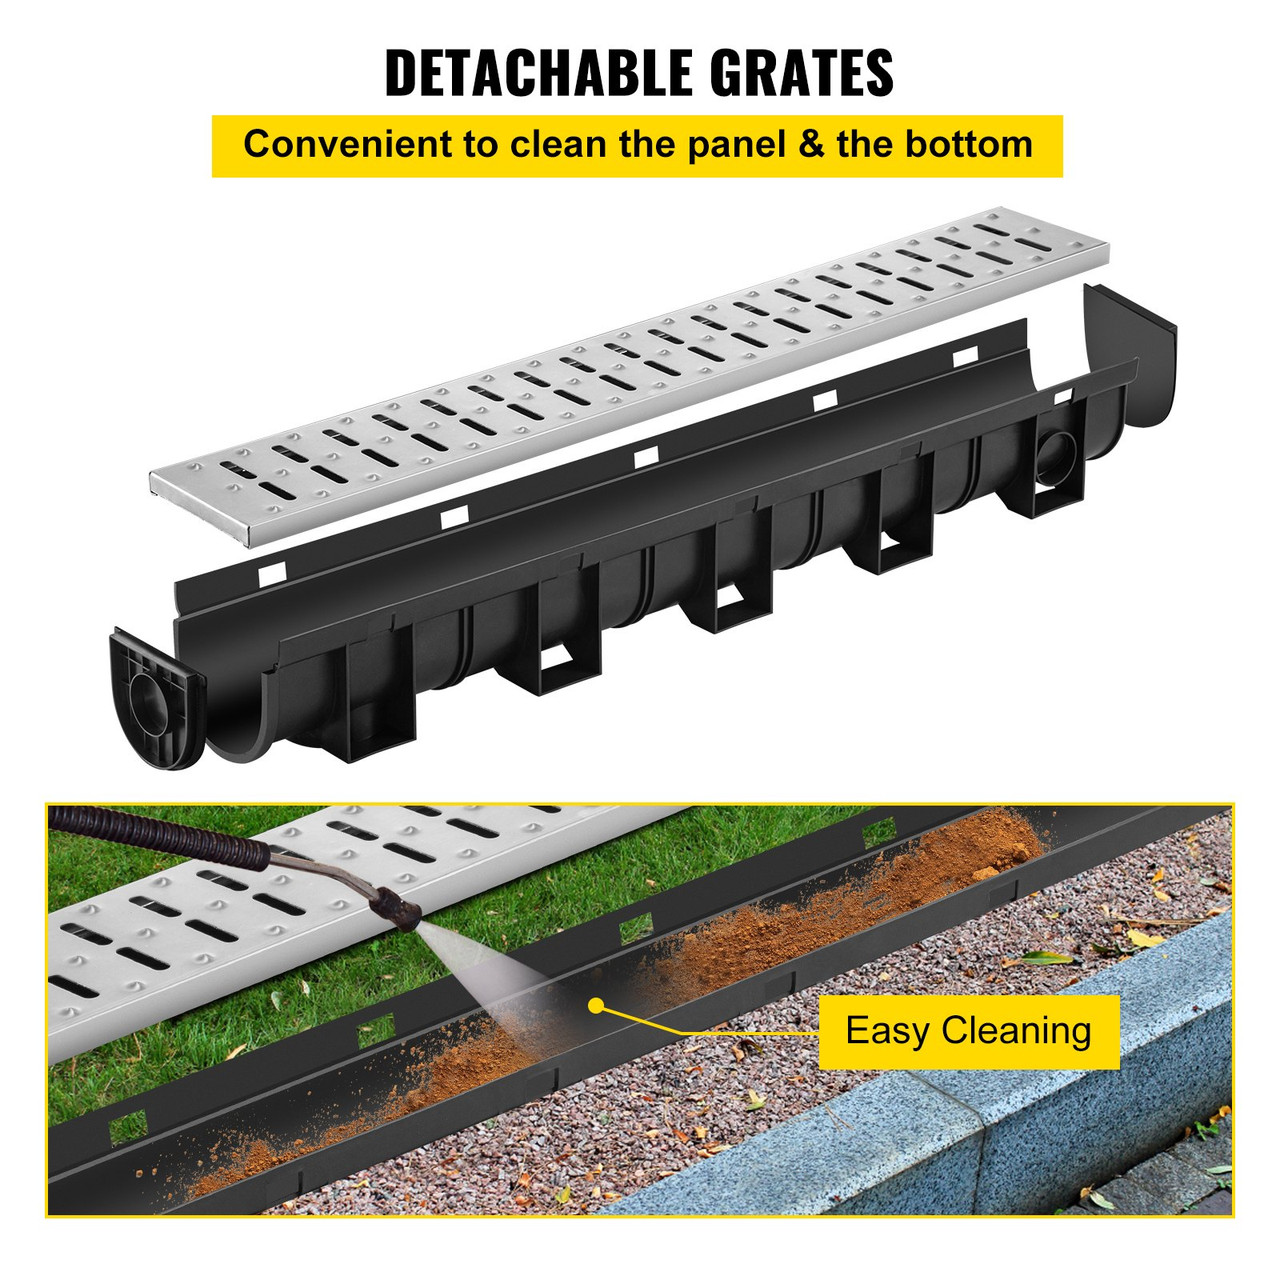 Trench Drain System, Channel Drain with Metal Grate, 5.9x5.1-Inch HDPE Drainage Trench, Black Plastic Garage Floor Drain, 3x39 Trench Drain Grate, with 3 End Caps, for Garden, Driveway-3 Pack